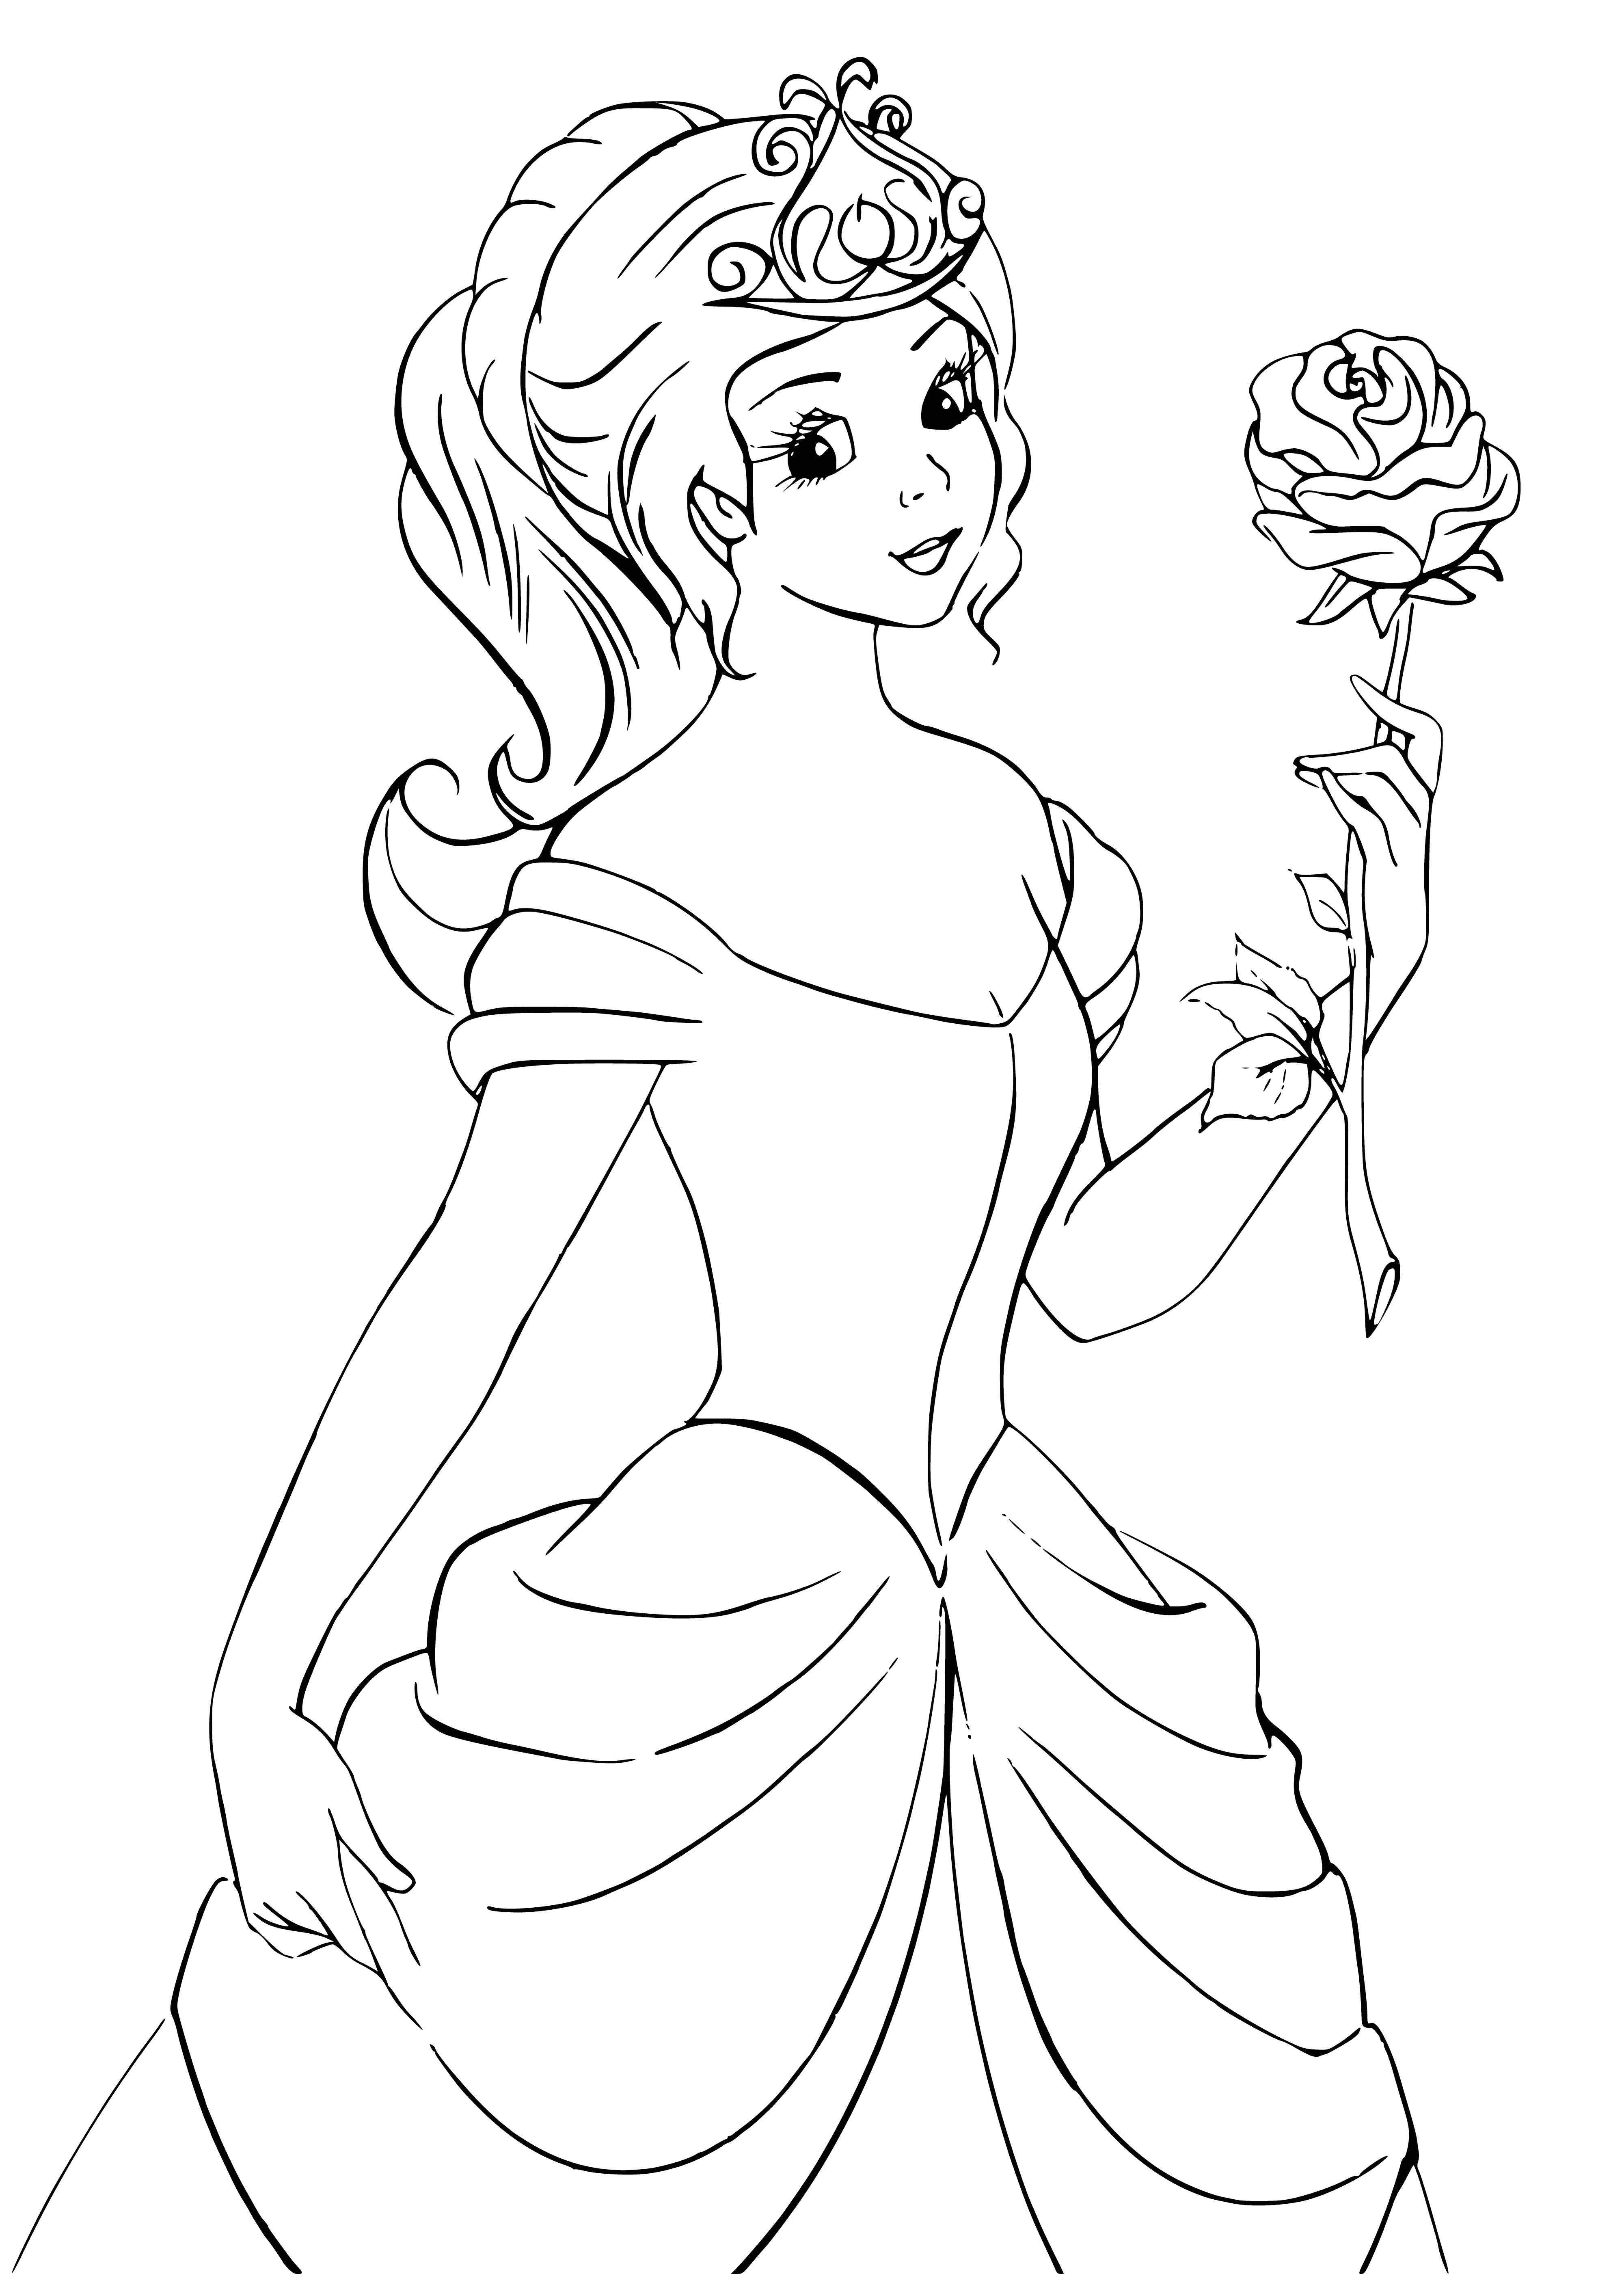 Princess holding a rose coloring page